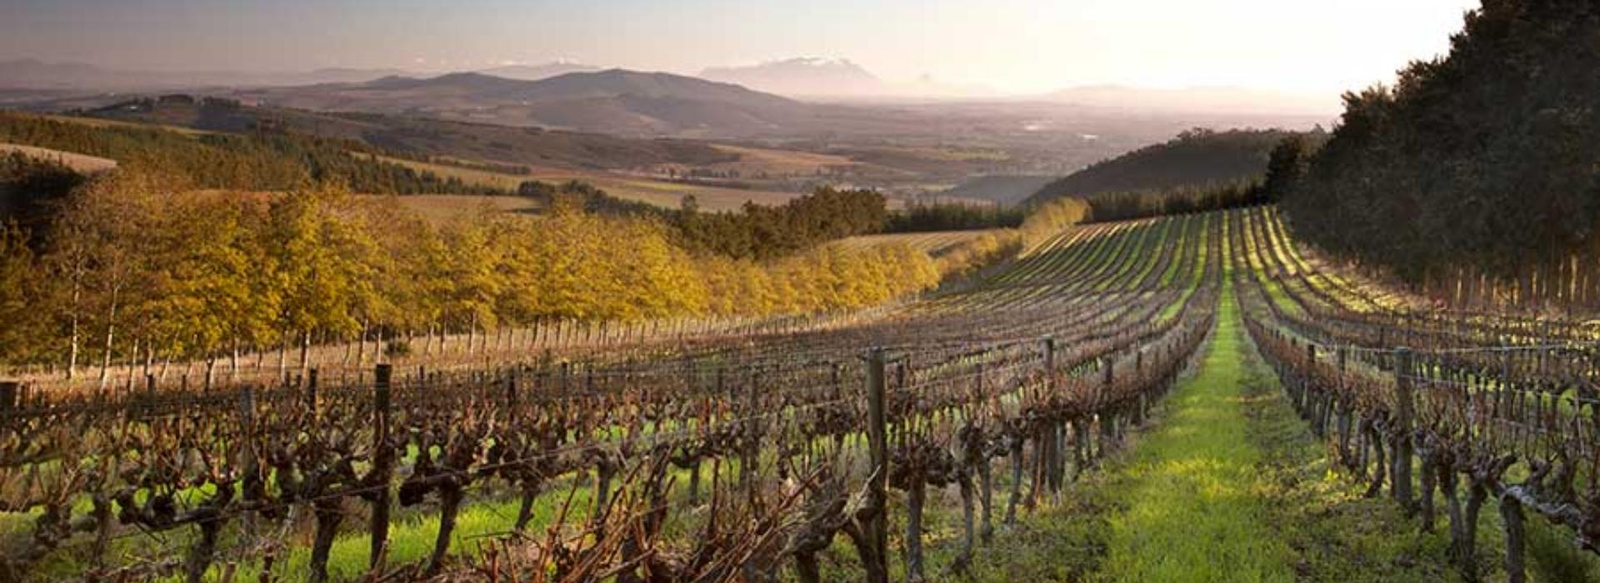 South Africa’s Top 5 Historic Wine Estates